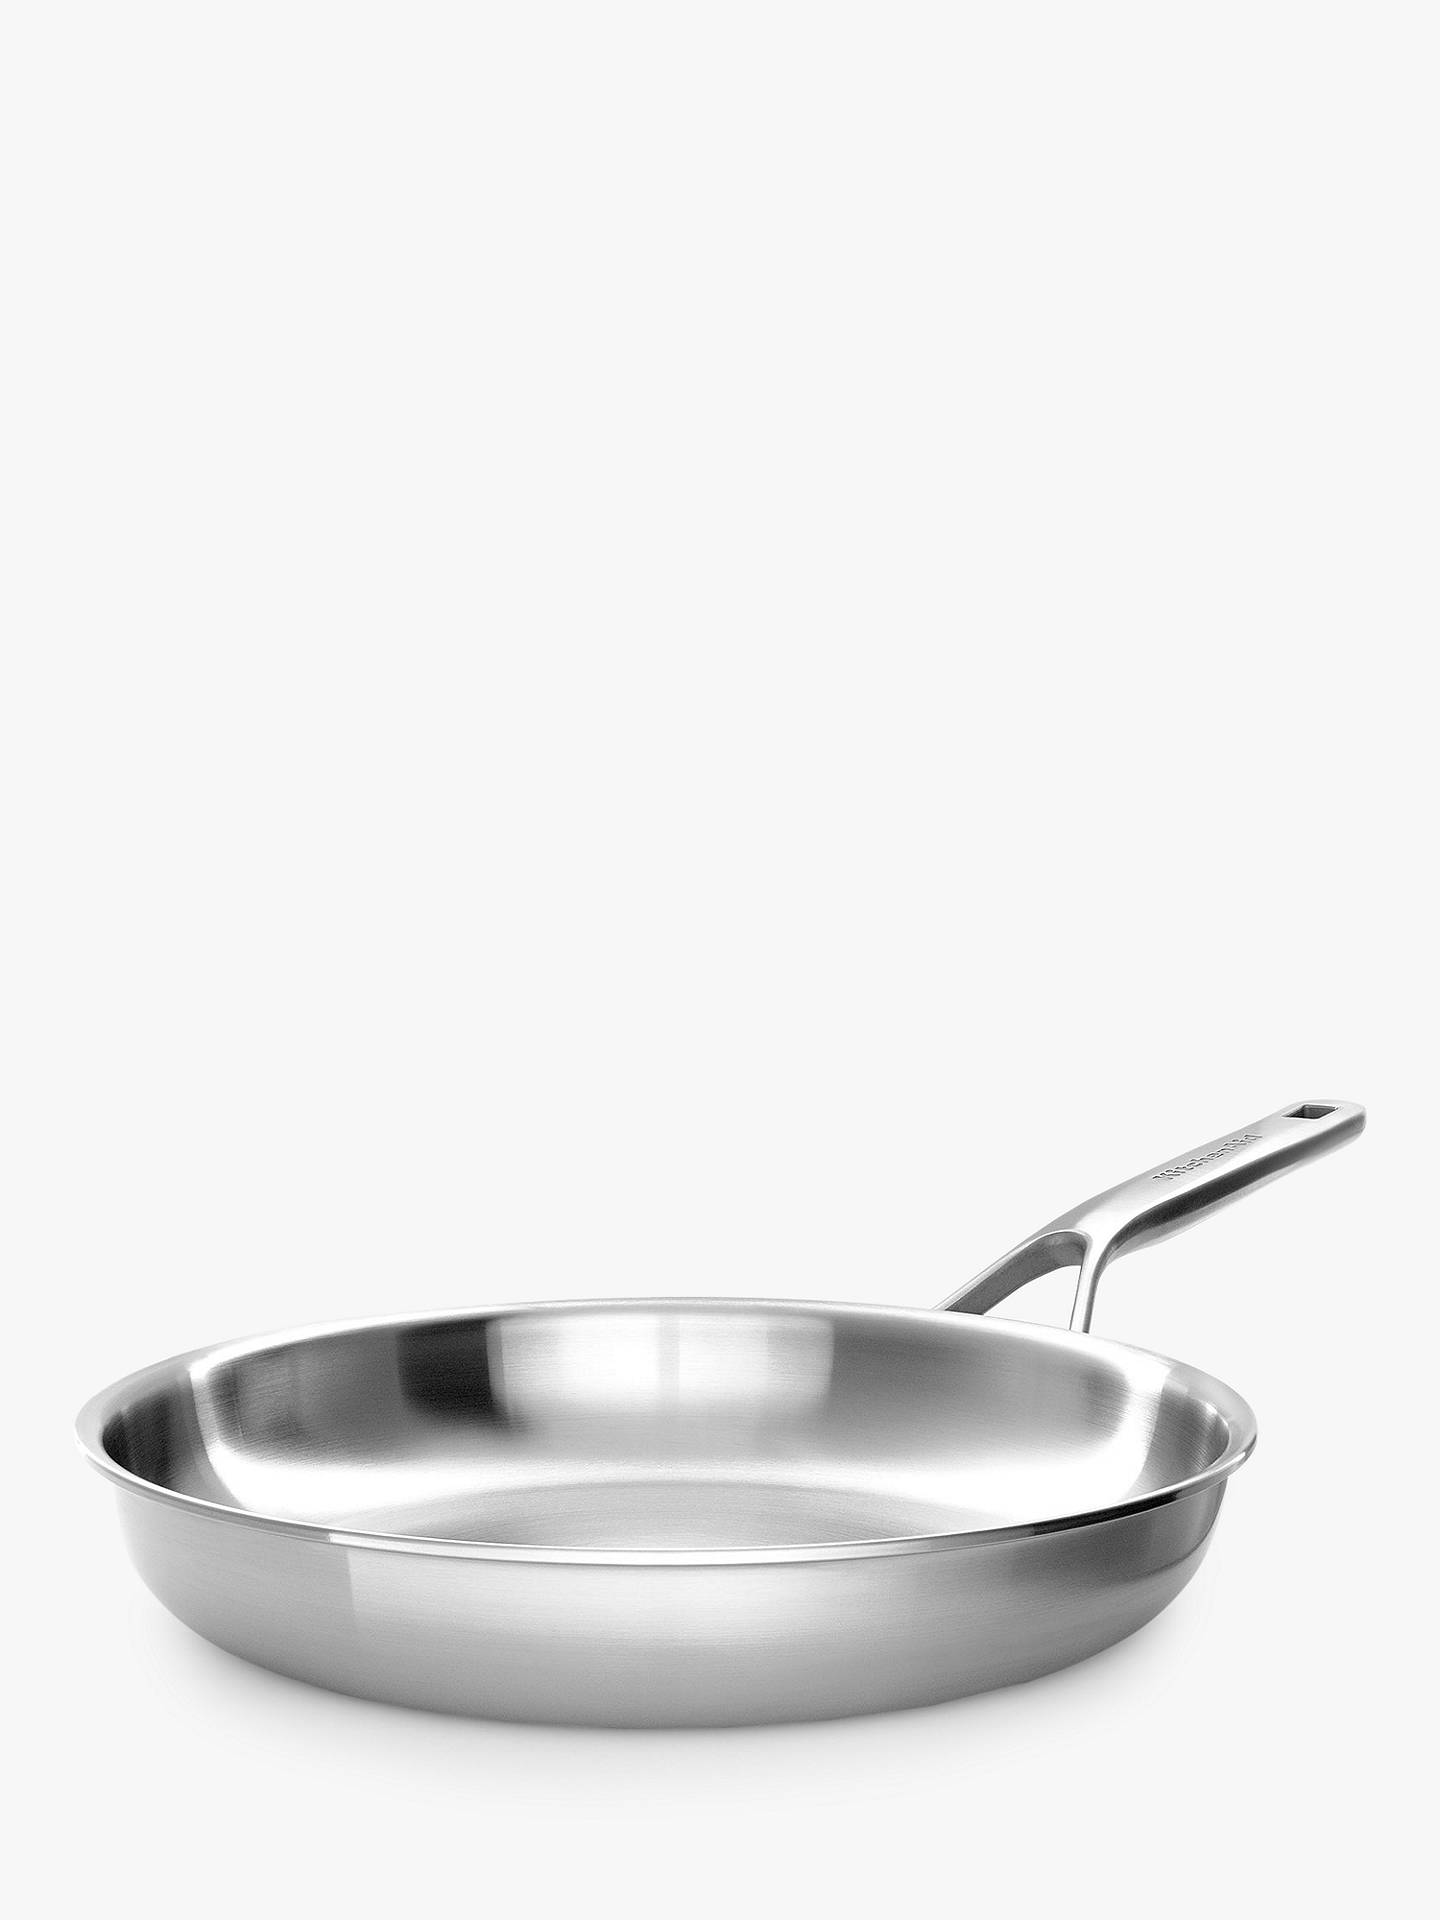 KitchenAid Multi-Ply Stainless Steel Uncoated Frying Pan, 28cm at John Uncoated Stainless Steel Frying Pan